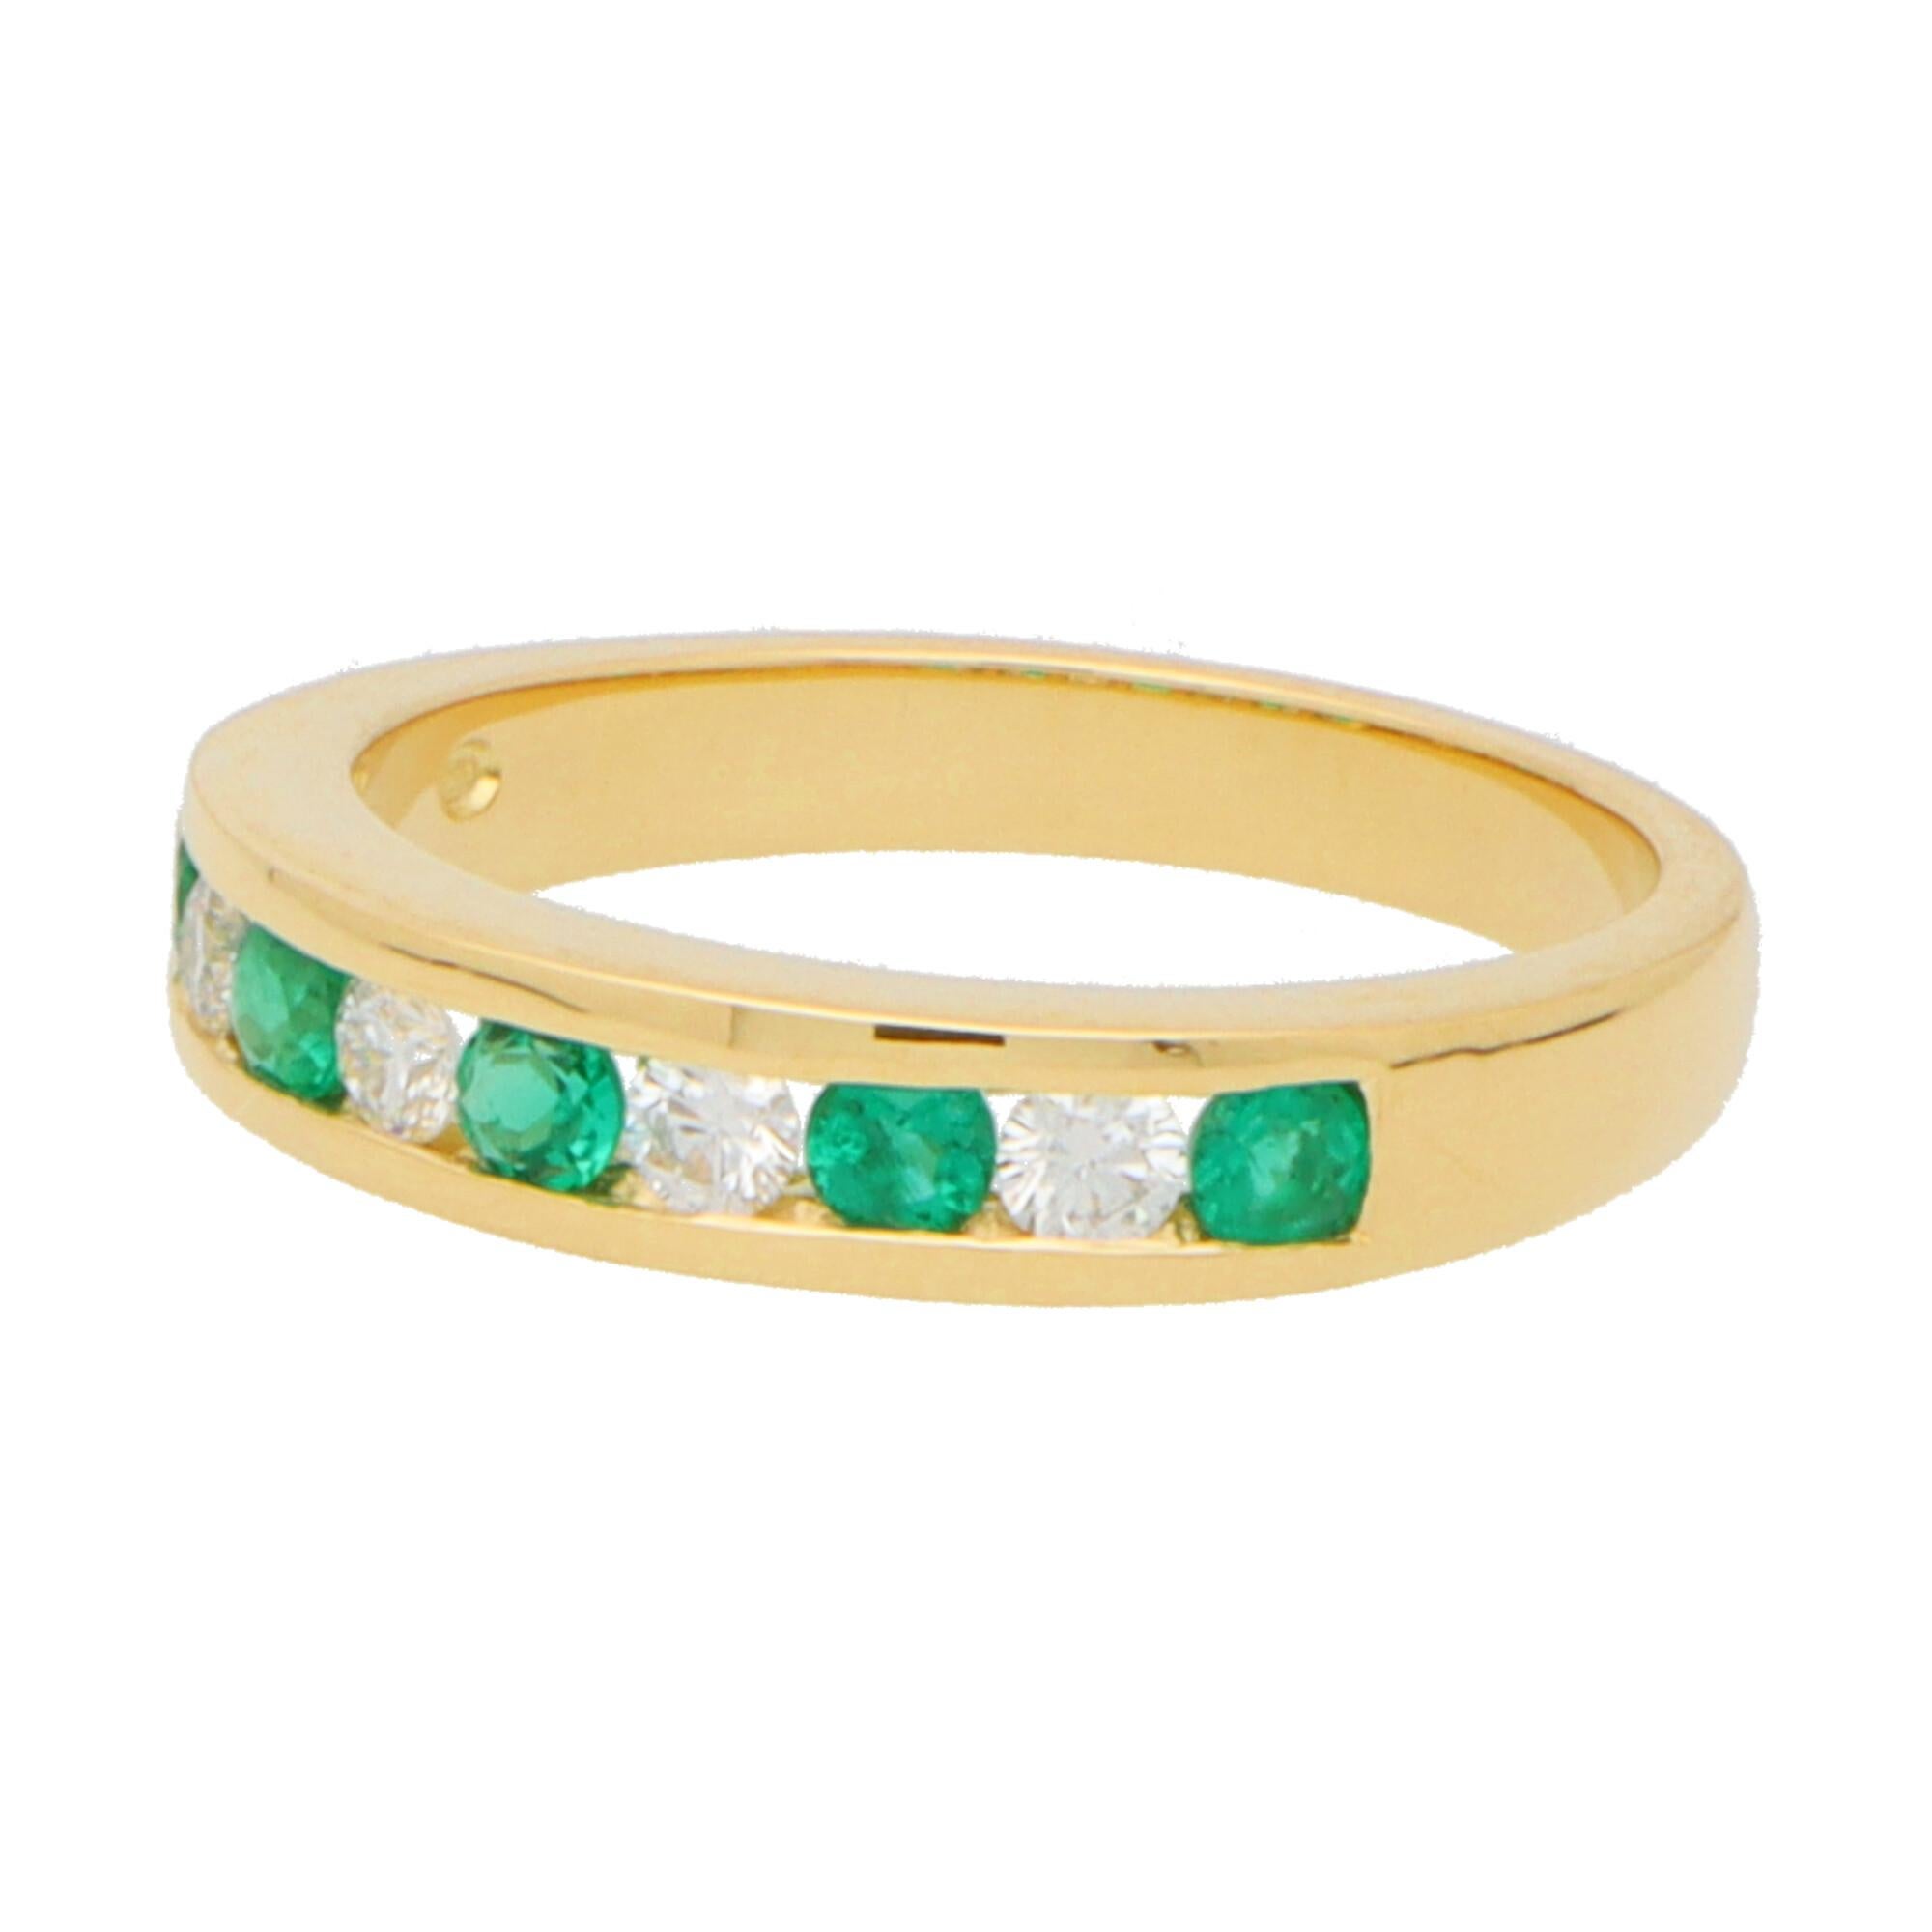 A sensational diamond and emerald half eternity ring set in 18k yellow gold. 

The ring is composed of 9 round cut stones altogether, 5 of which being emeralds and 4 diamonds. All the stones are perfectly bezel set within a 4mm yellow gold